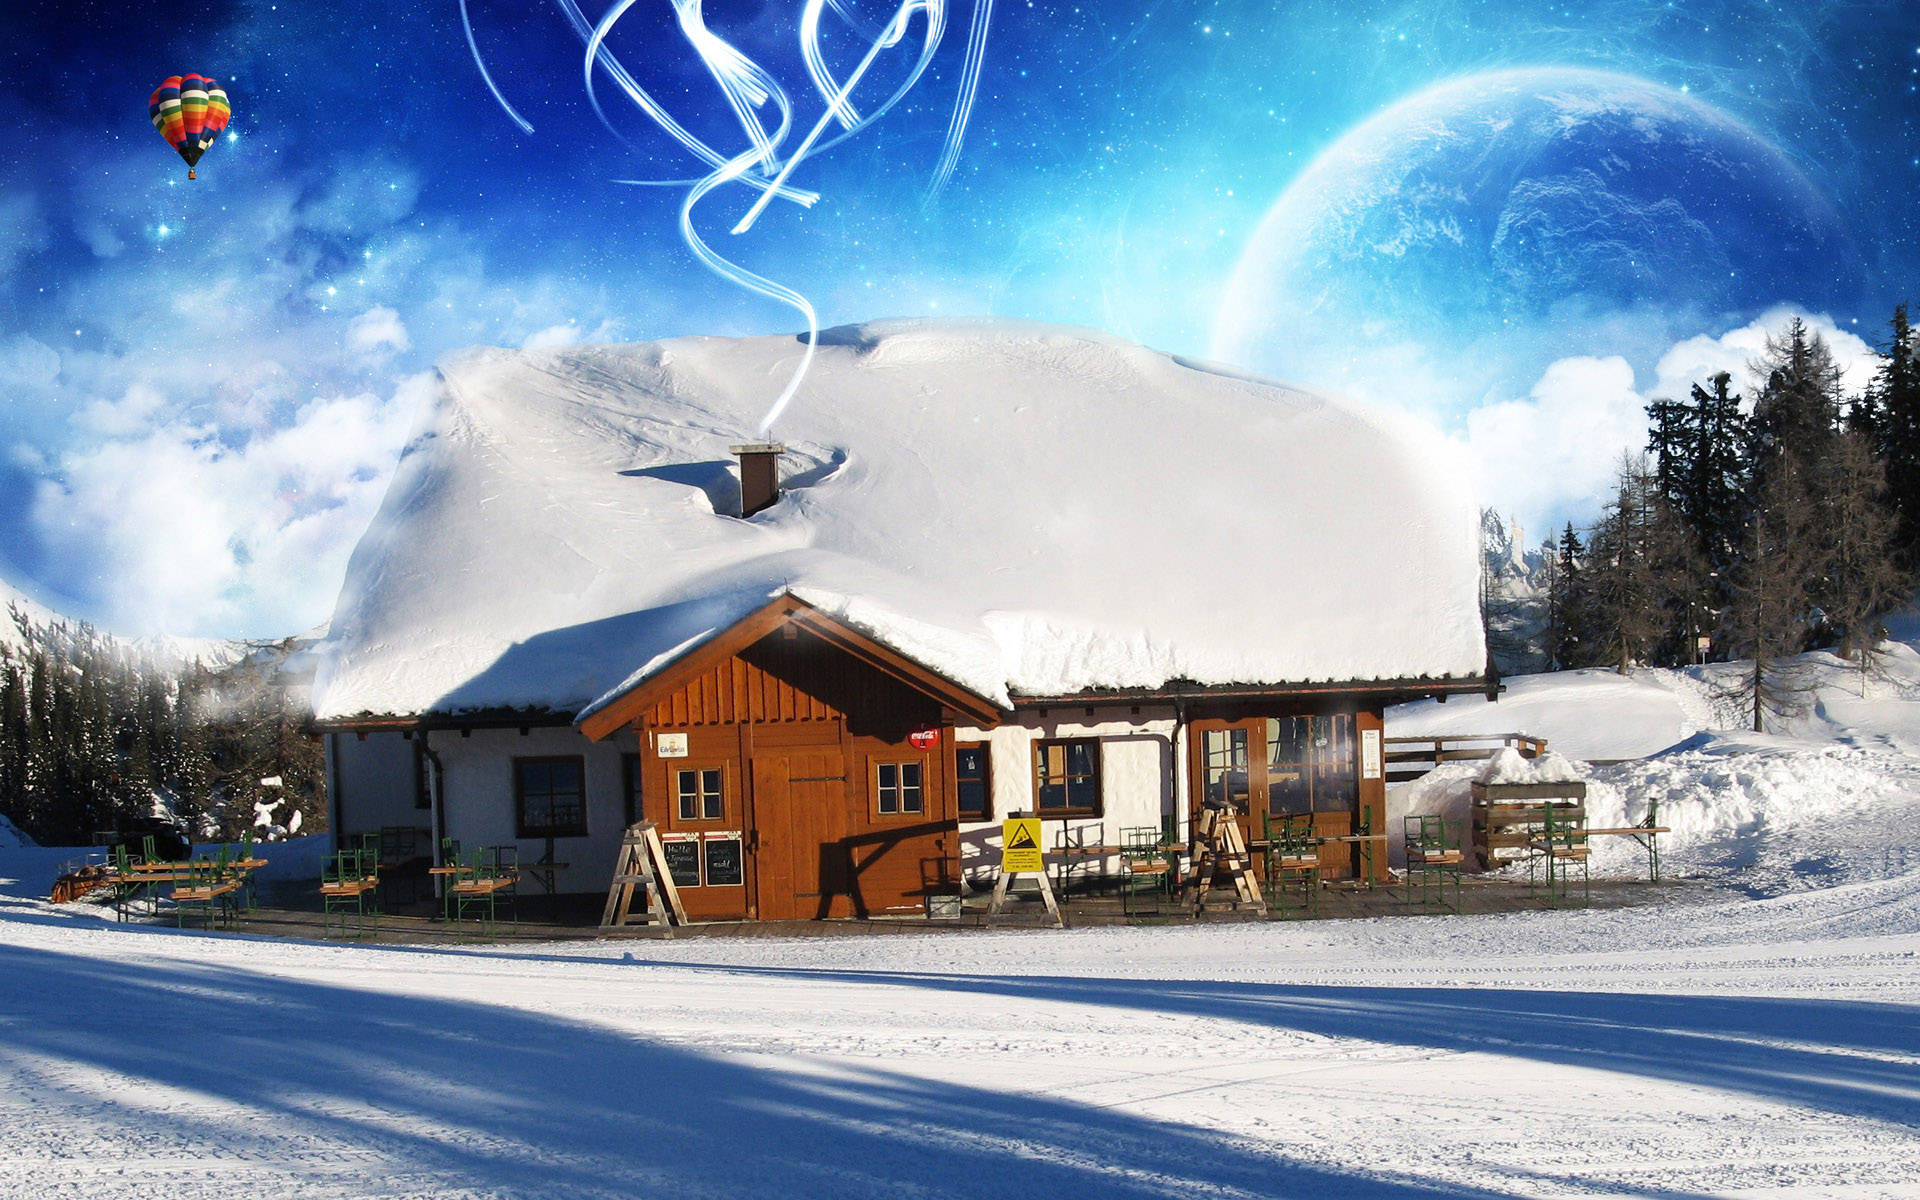 Caption: Cozy Winter Cabin - Home Sweet Home Wallpaper